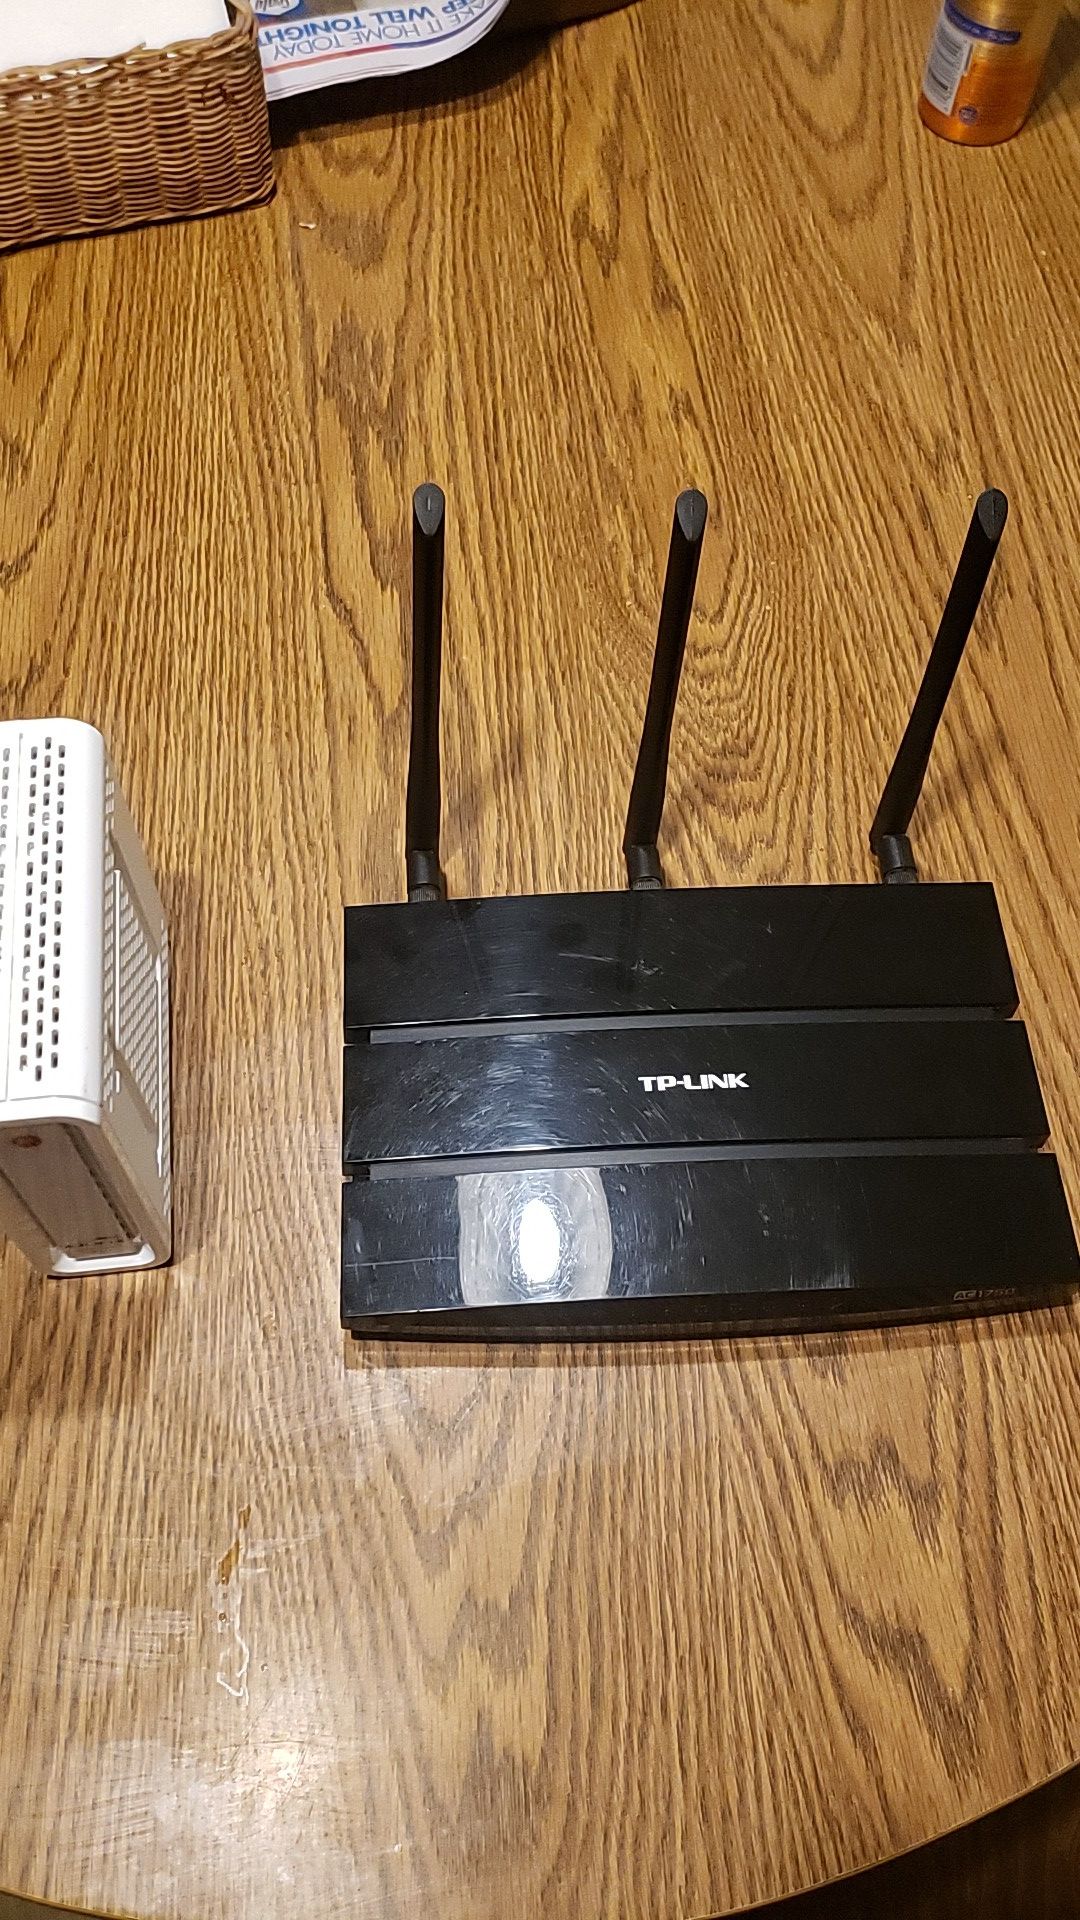 SB6141 Cable modem/wireless router